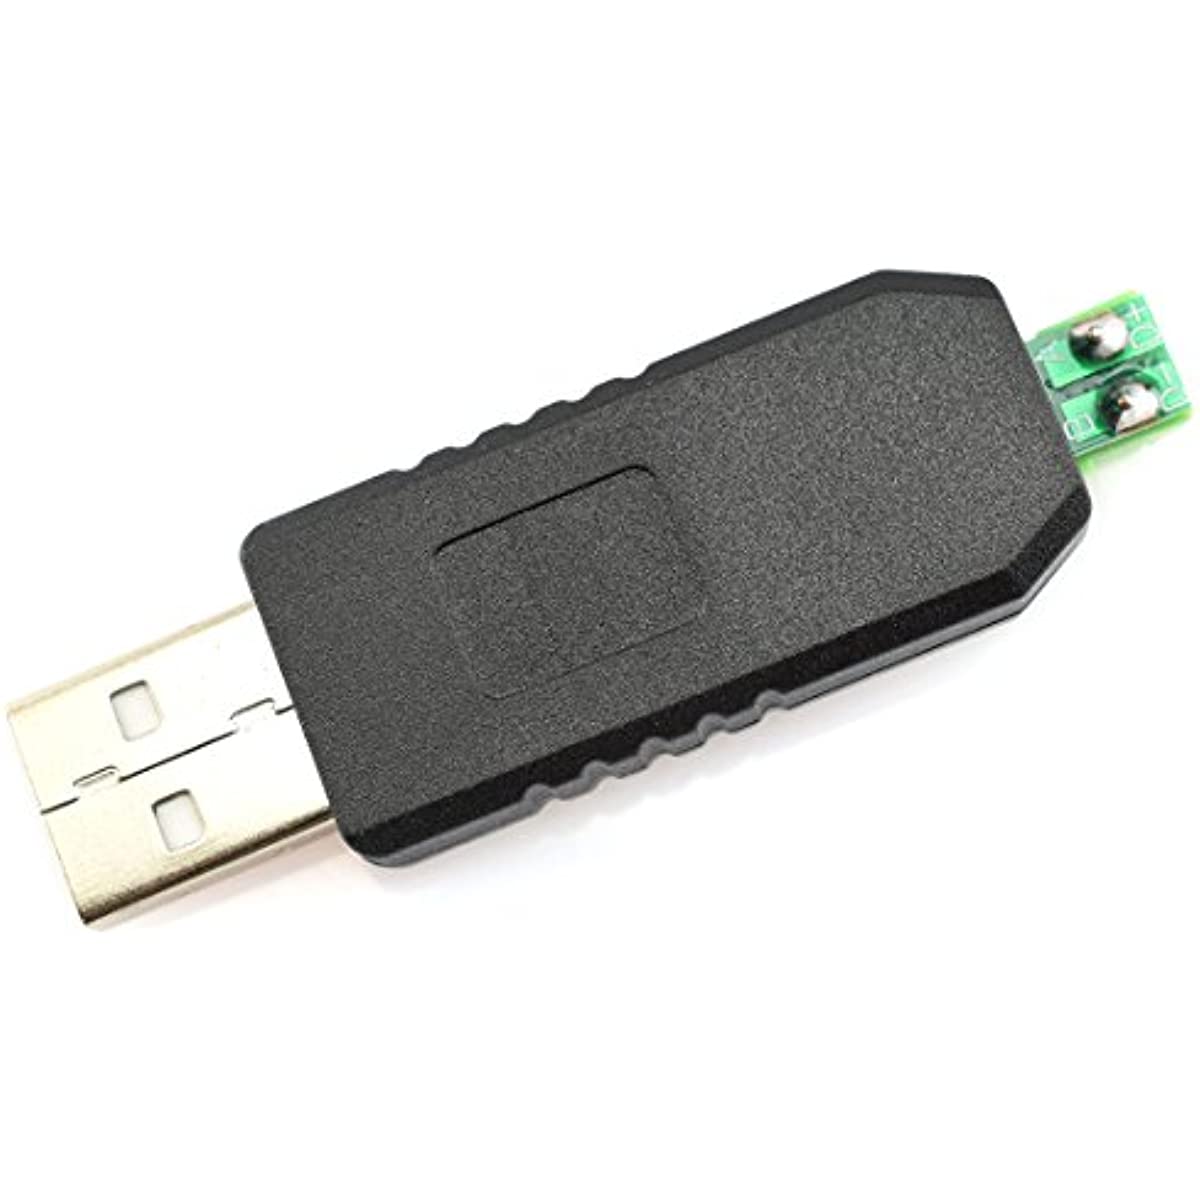 ZINMARK USB to RS485 Serial Converter Adapter CH340T Chip LED Display Data Communication/PLC Data Reading/Data R&W Centralized Control Converter Module for Win 7 / XP/Vista